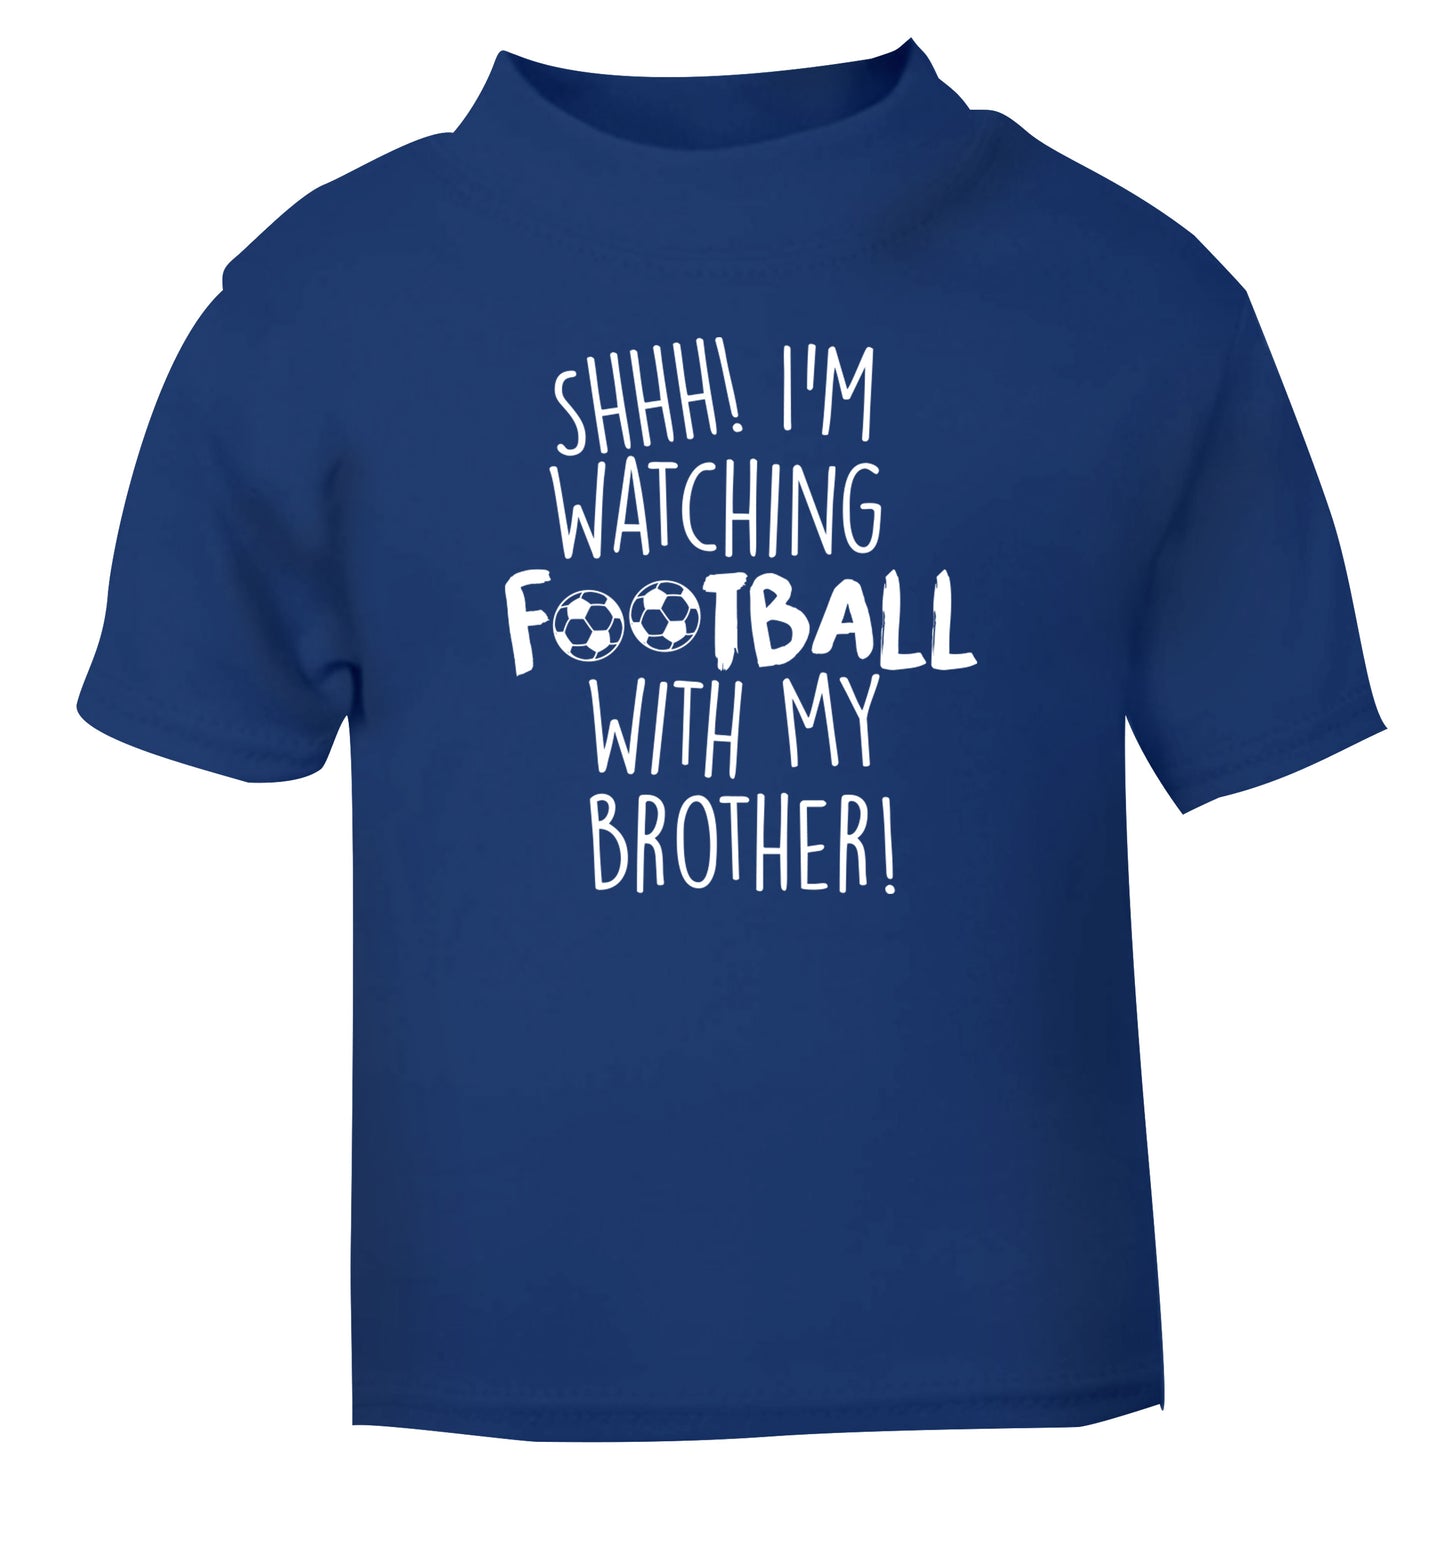 Shhh I'm watching football with my brother blue Baby Toddler Tshirt 2 Years